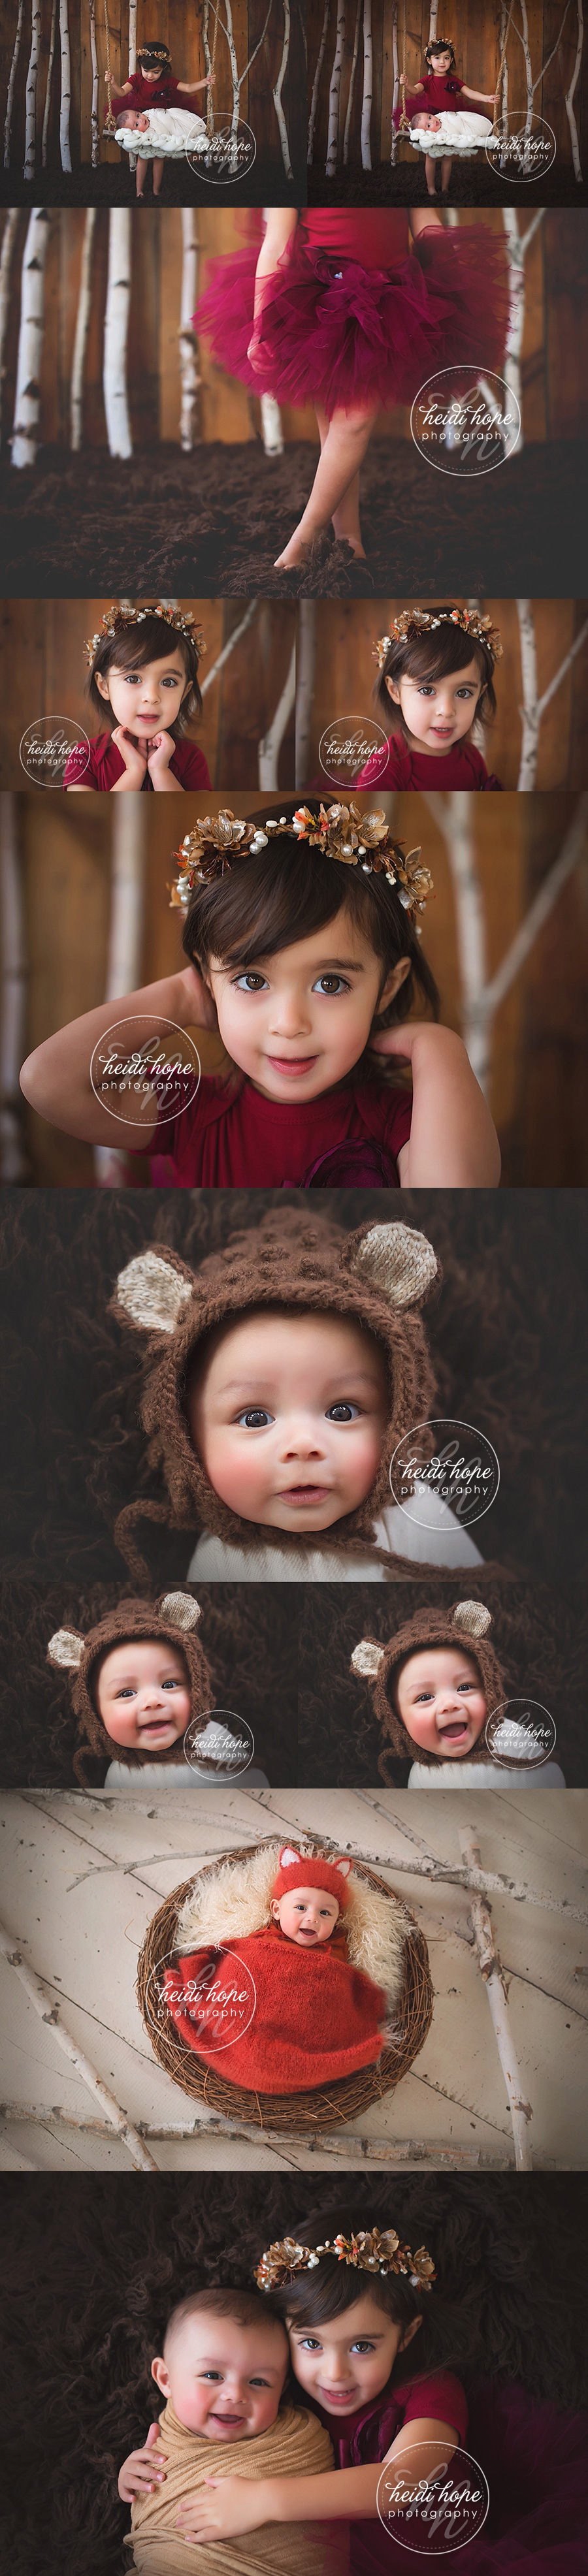 baby-and-sister-winter-studio-session-with-fox-woodland-theme